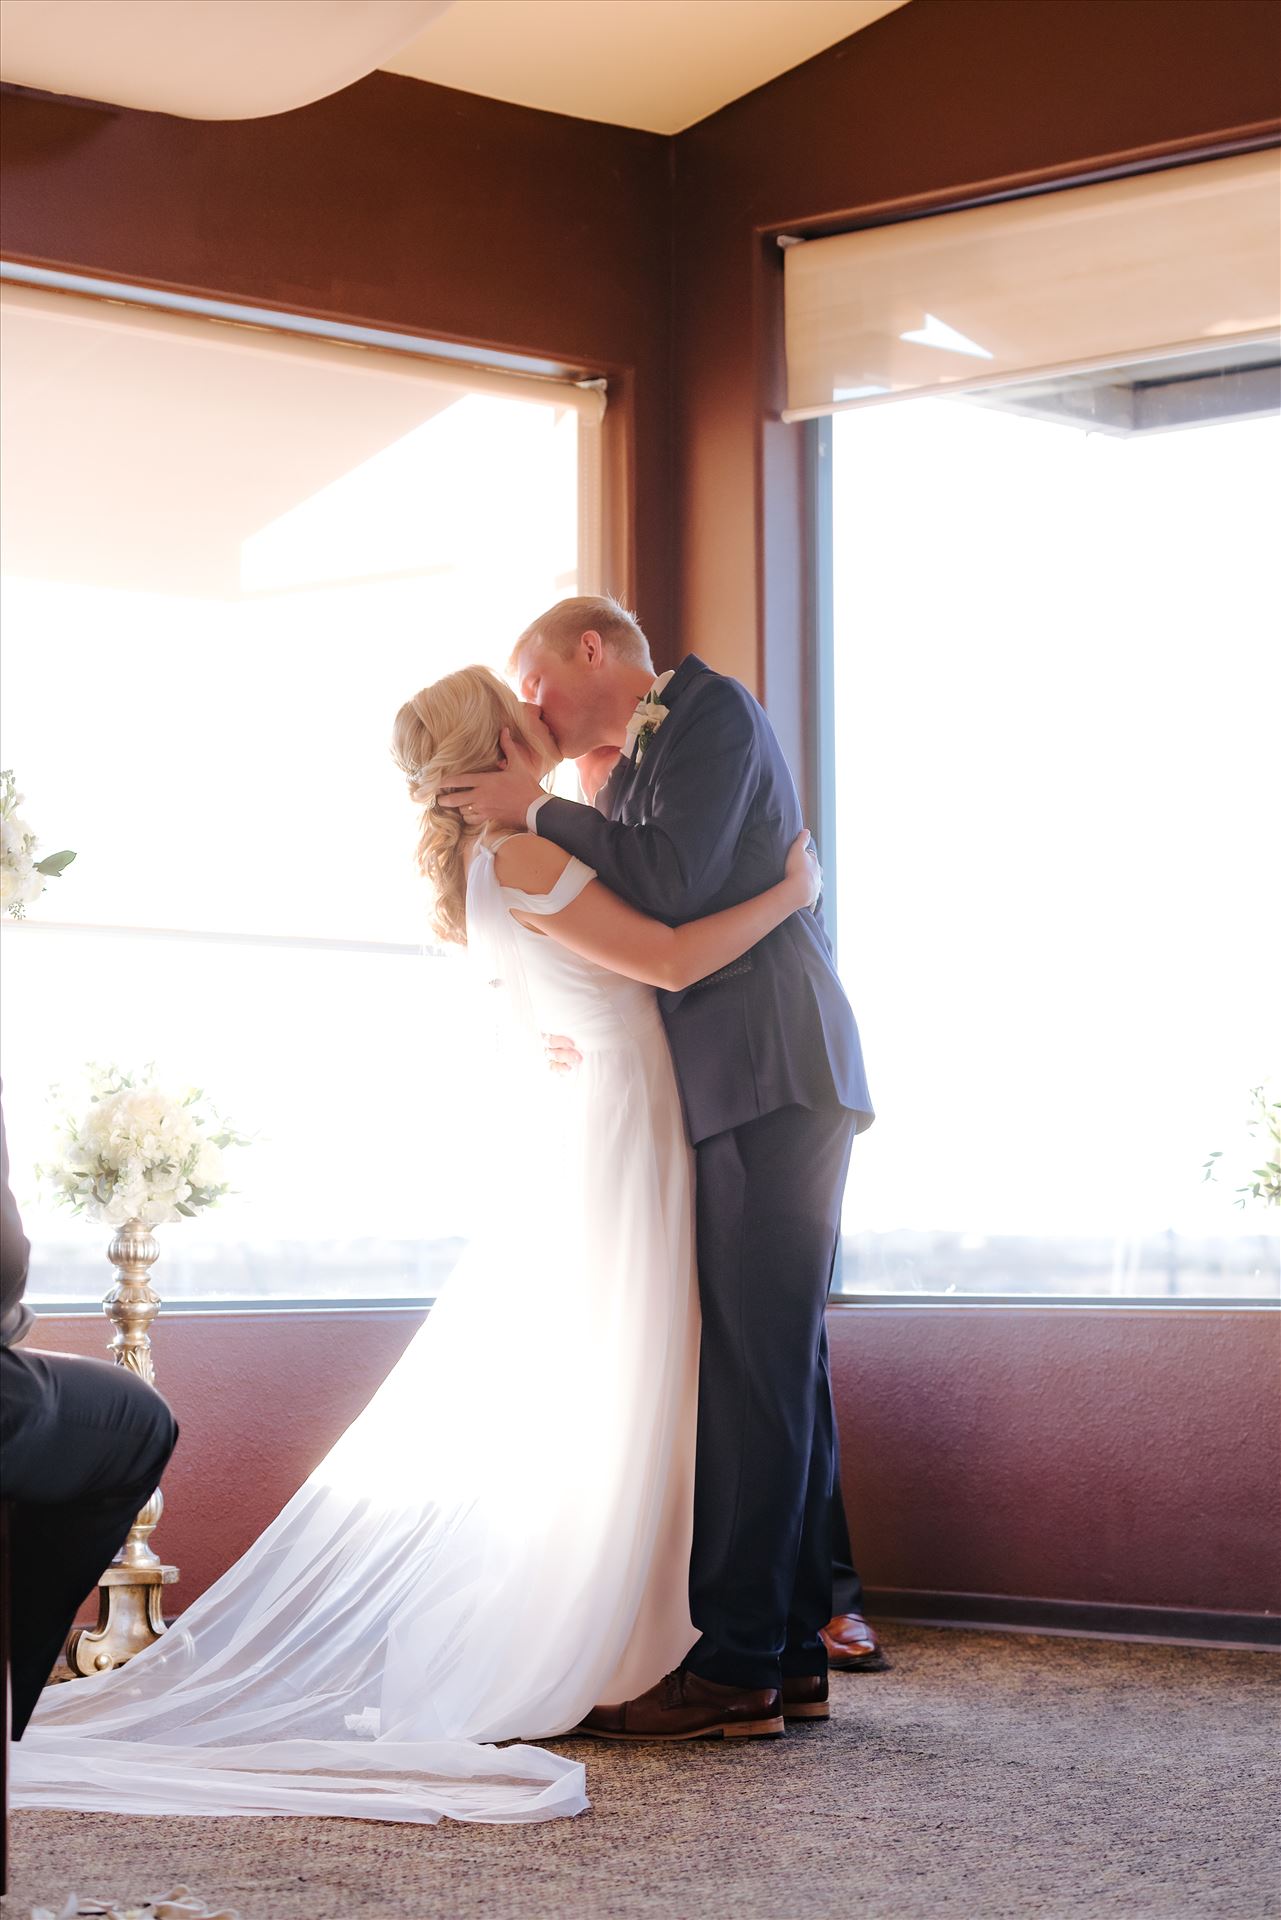 FW-8131.JPG - Sarah Williams of Mirror's Edge Photography, a San Luis Obispo Wedding and Engagement Photographer, captures Ryan and Joanna's wedding at the iconic Windows on the Water Restaurant in Morro Bay, California.  Bride and Groom kiss after I Do. by Sarah Williams